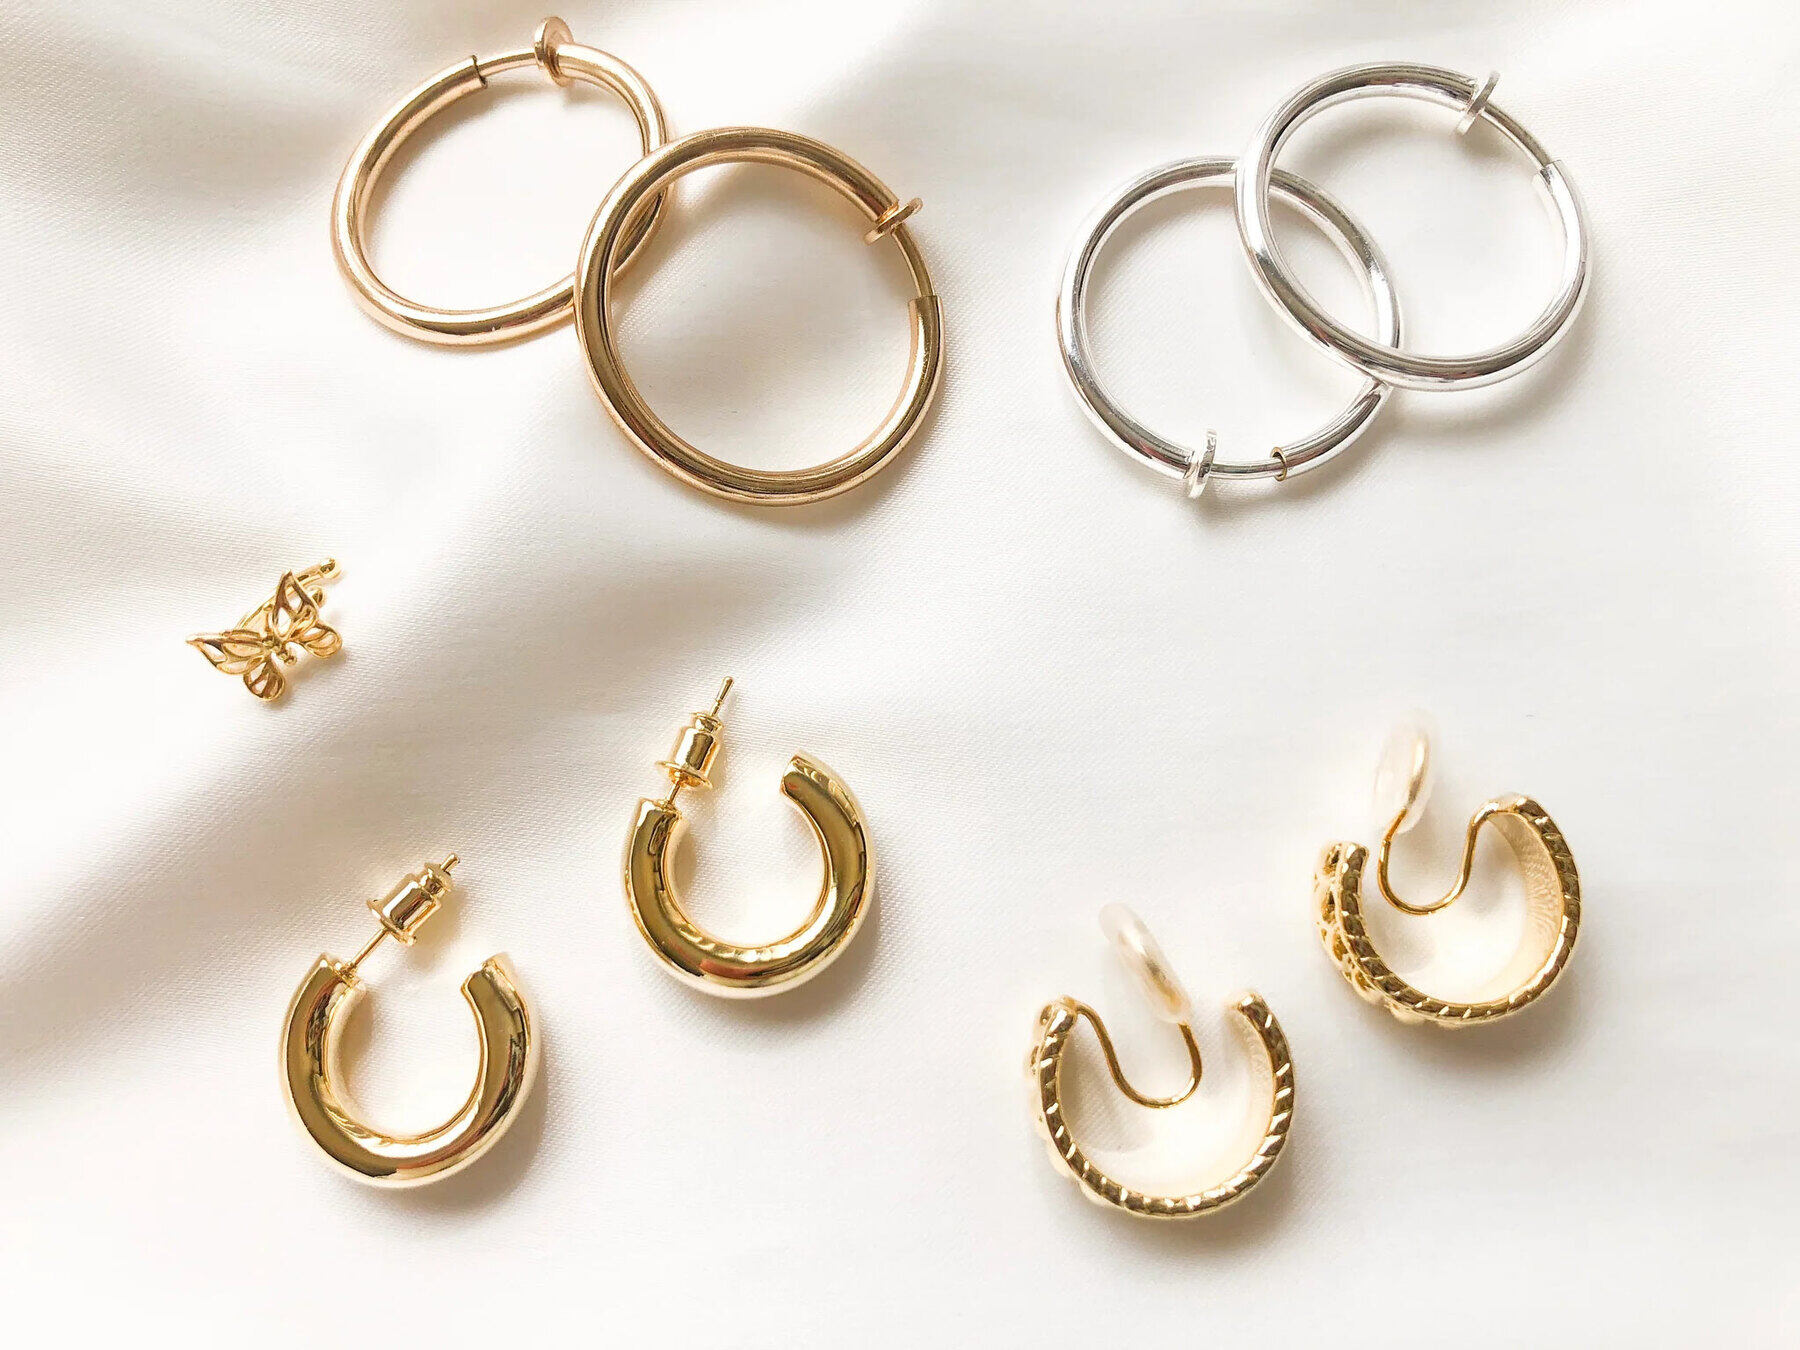 How To Store Clip-On Earrings